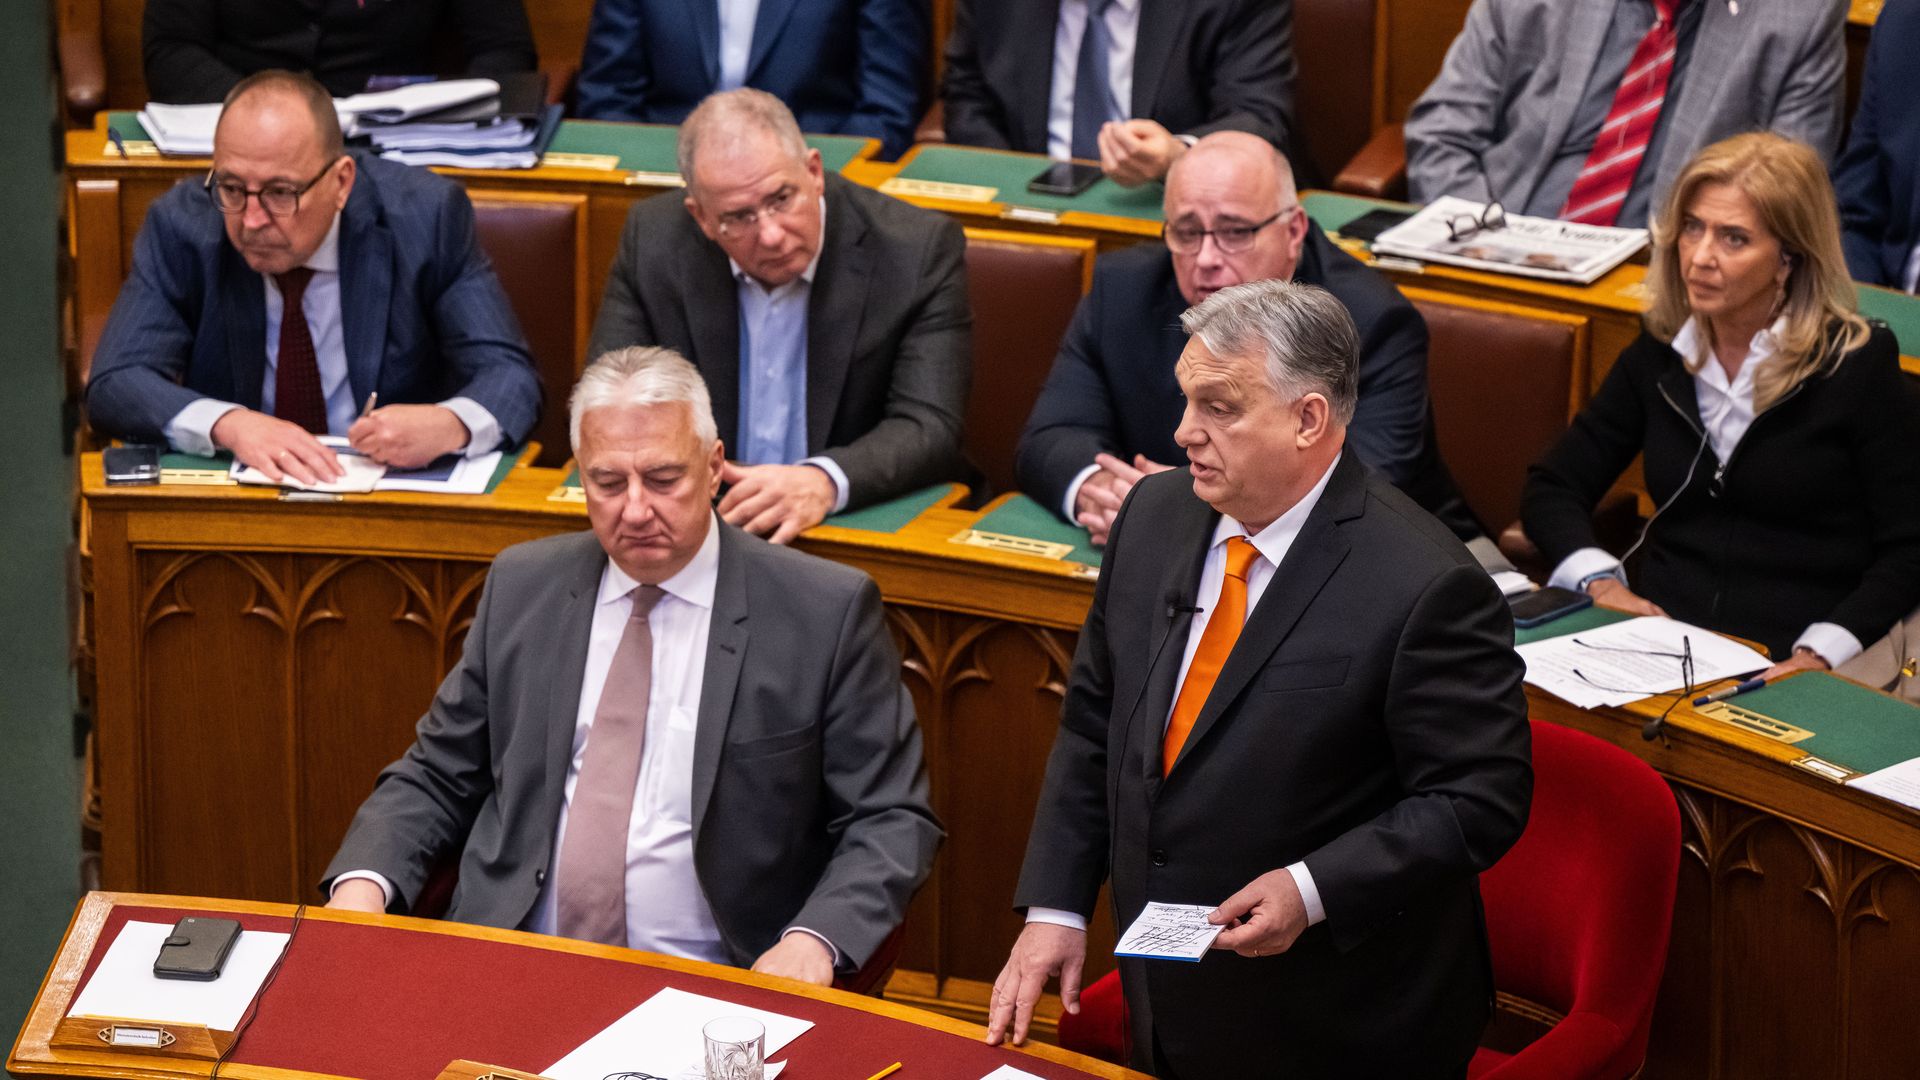 Hungarian Prime Minister Viktor Orban (r) speaks during the parliamentary session before the vote on the ratification of Sweden's NATO membership